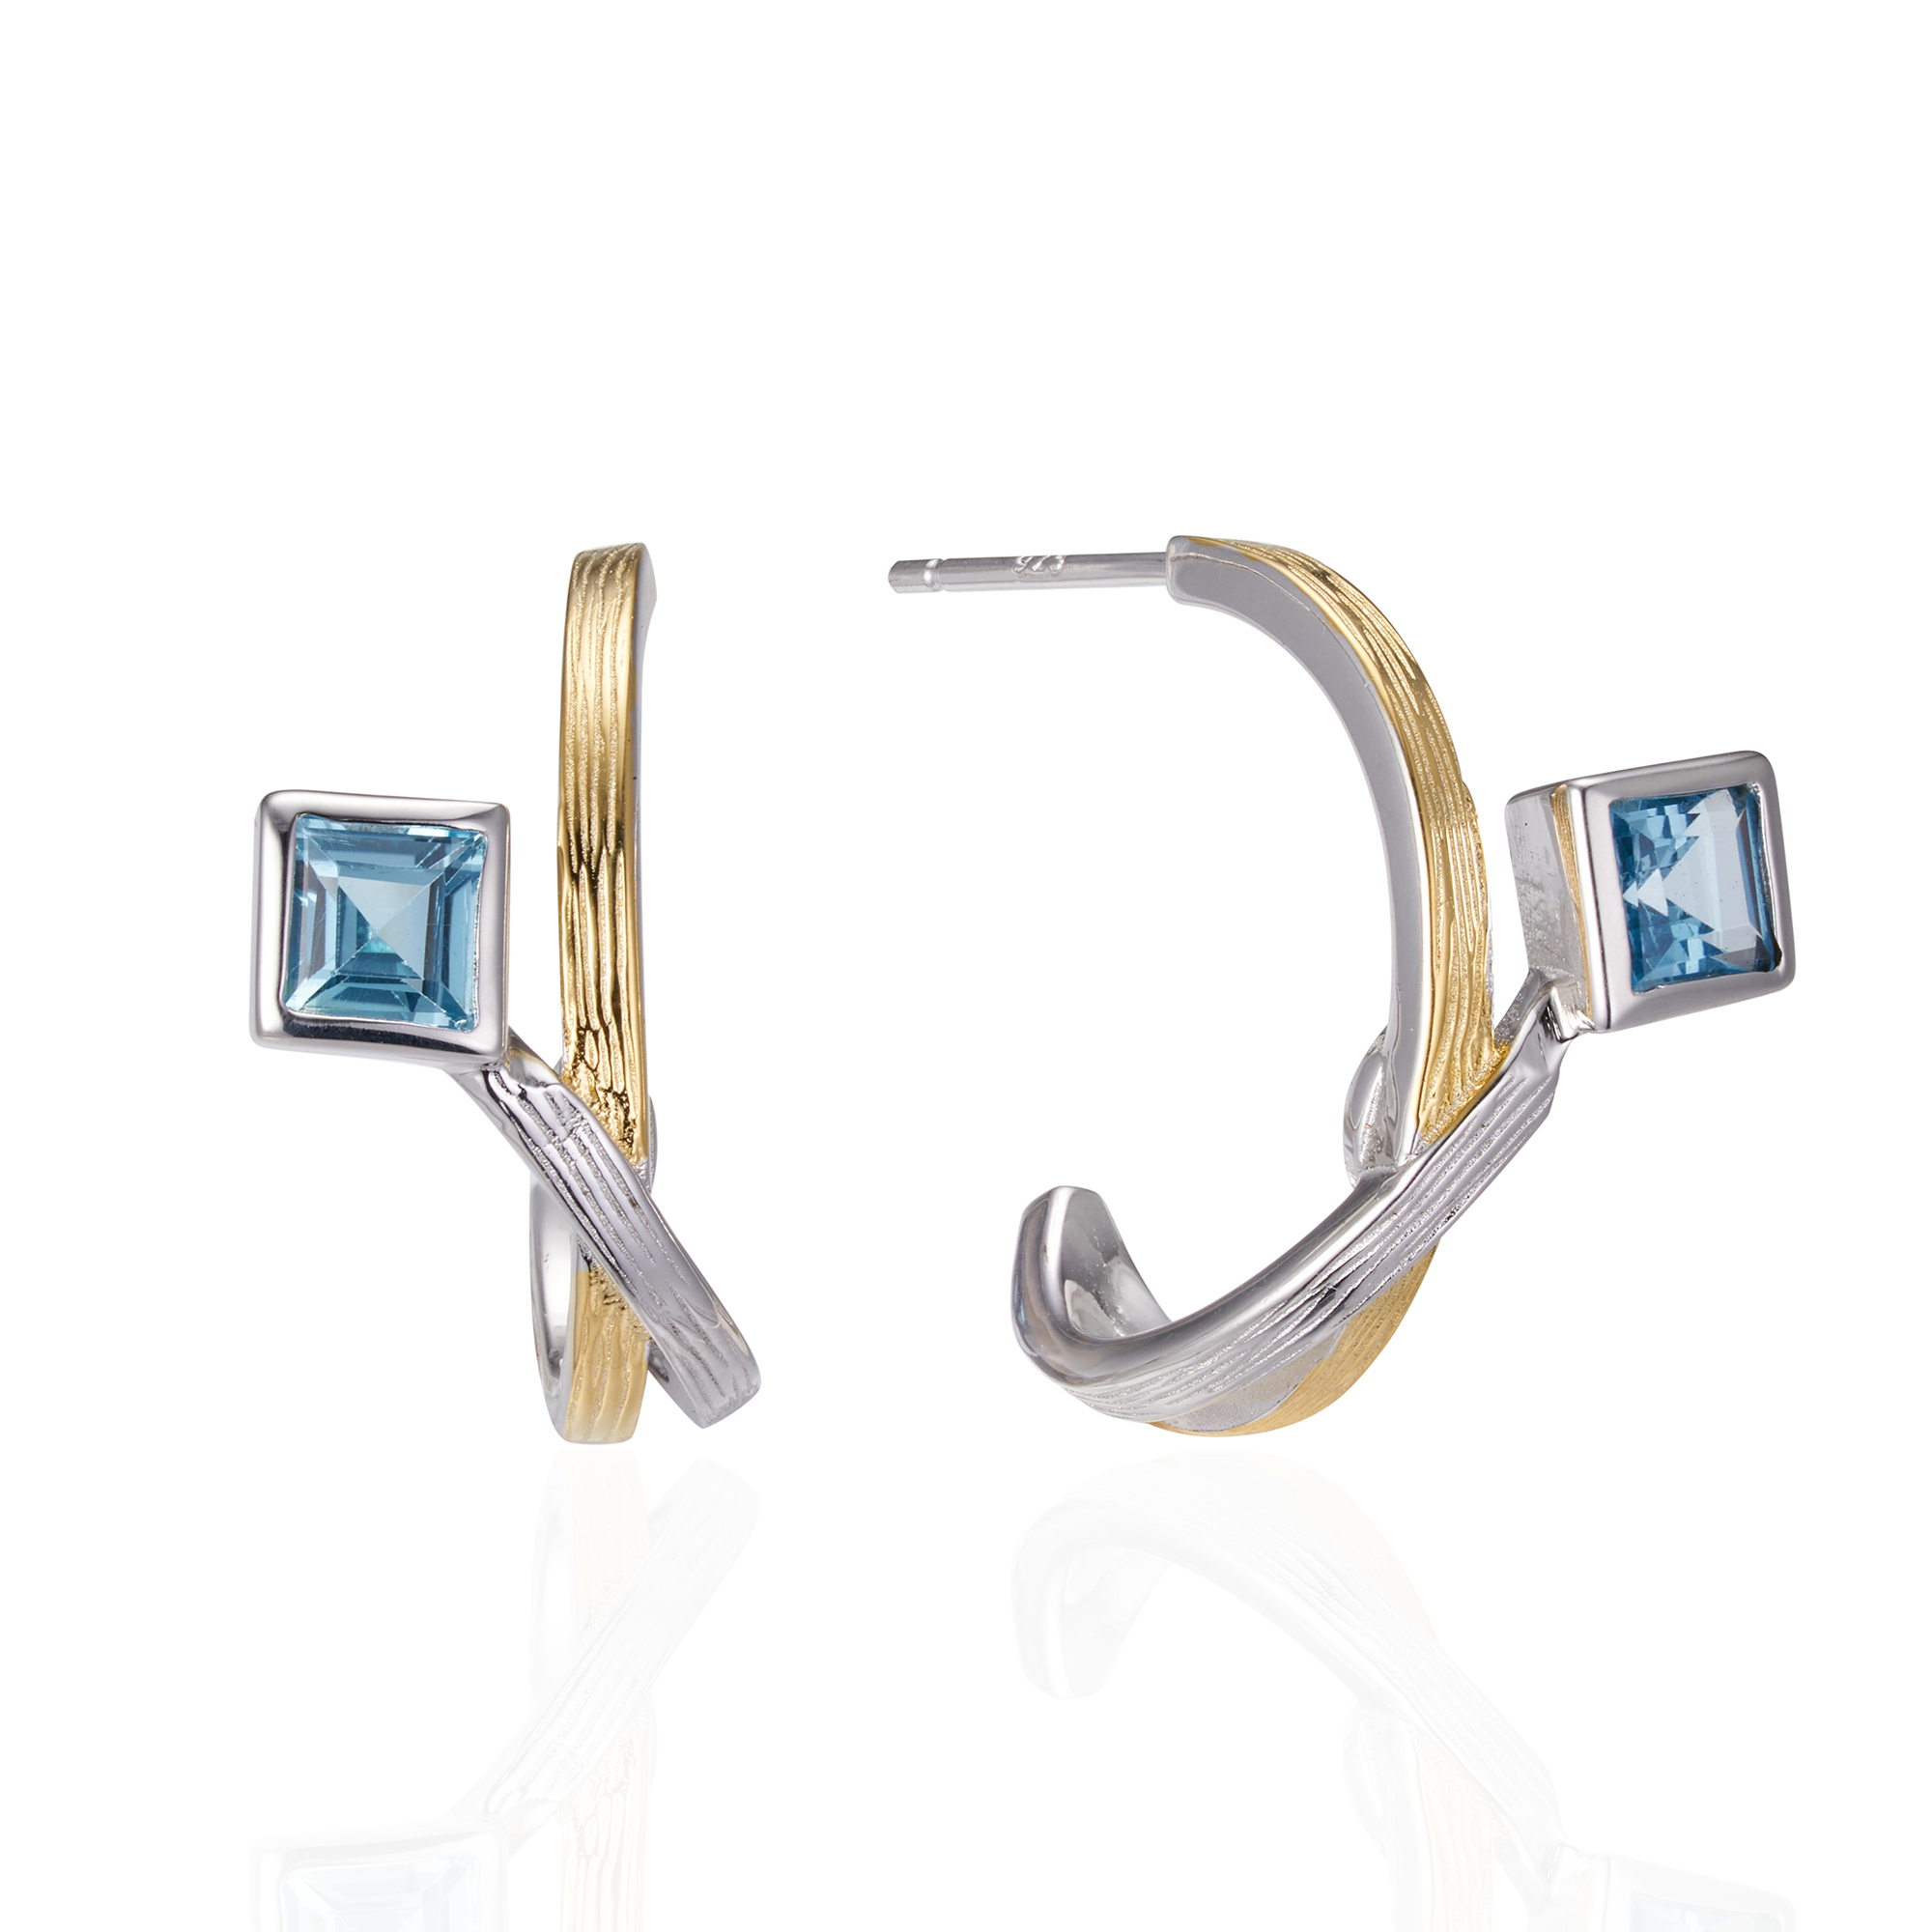 A pair of  silver earrings gold plated with square blue topaz stones.